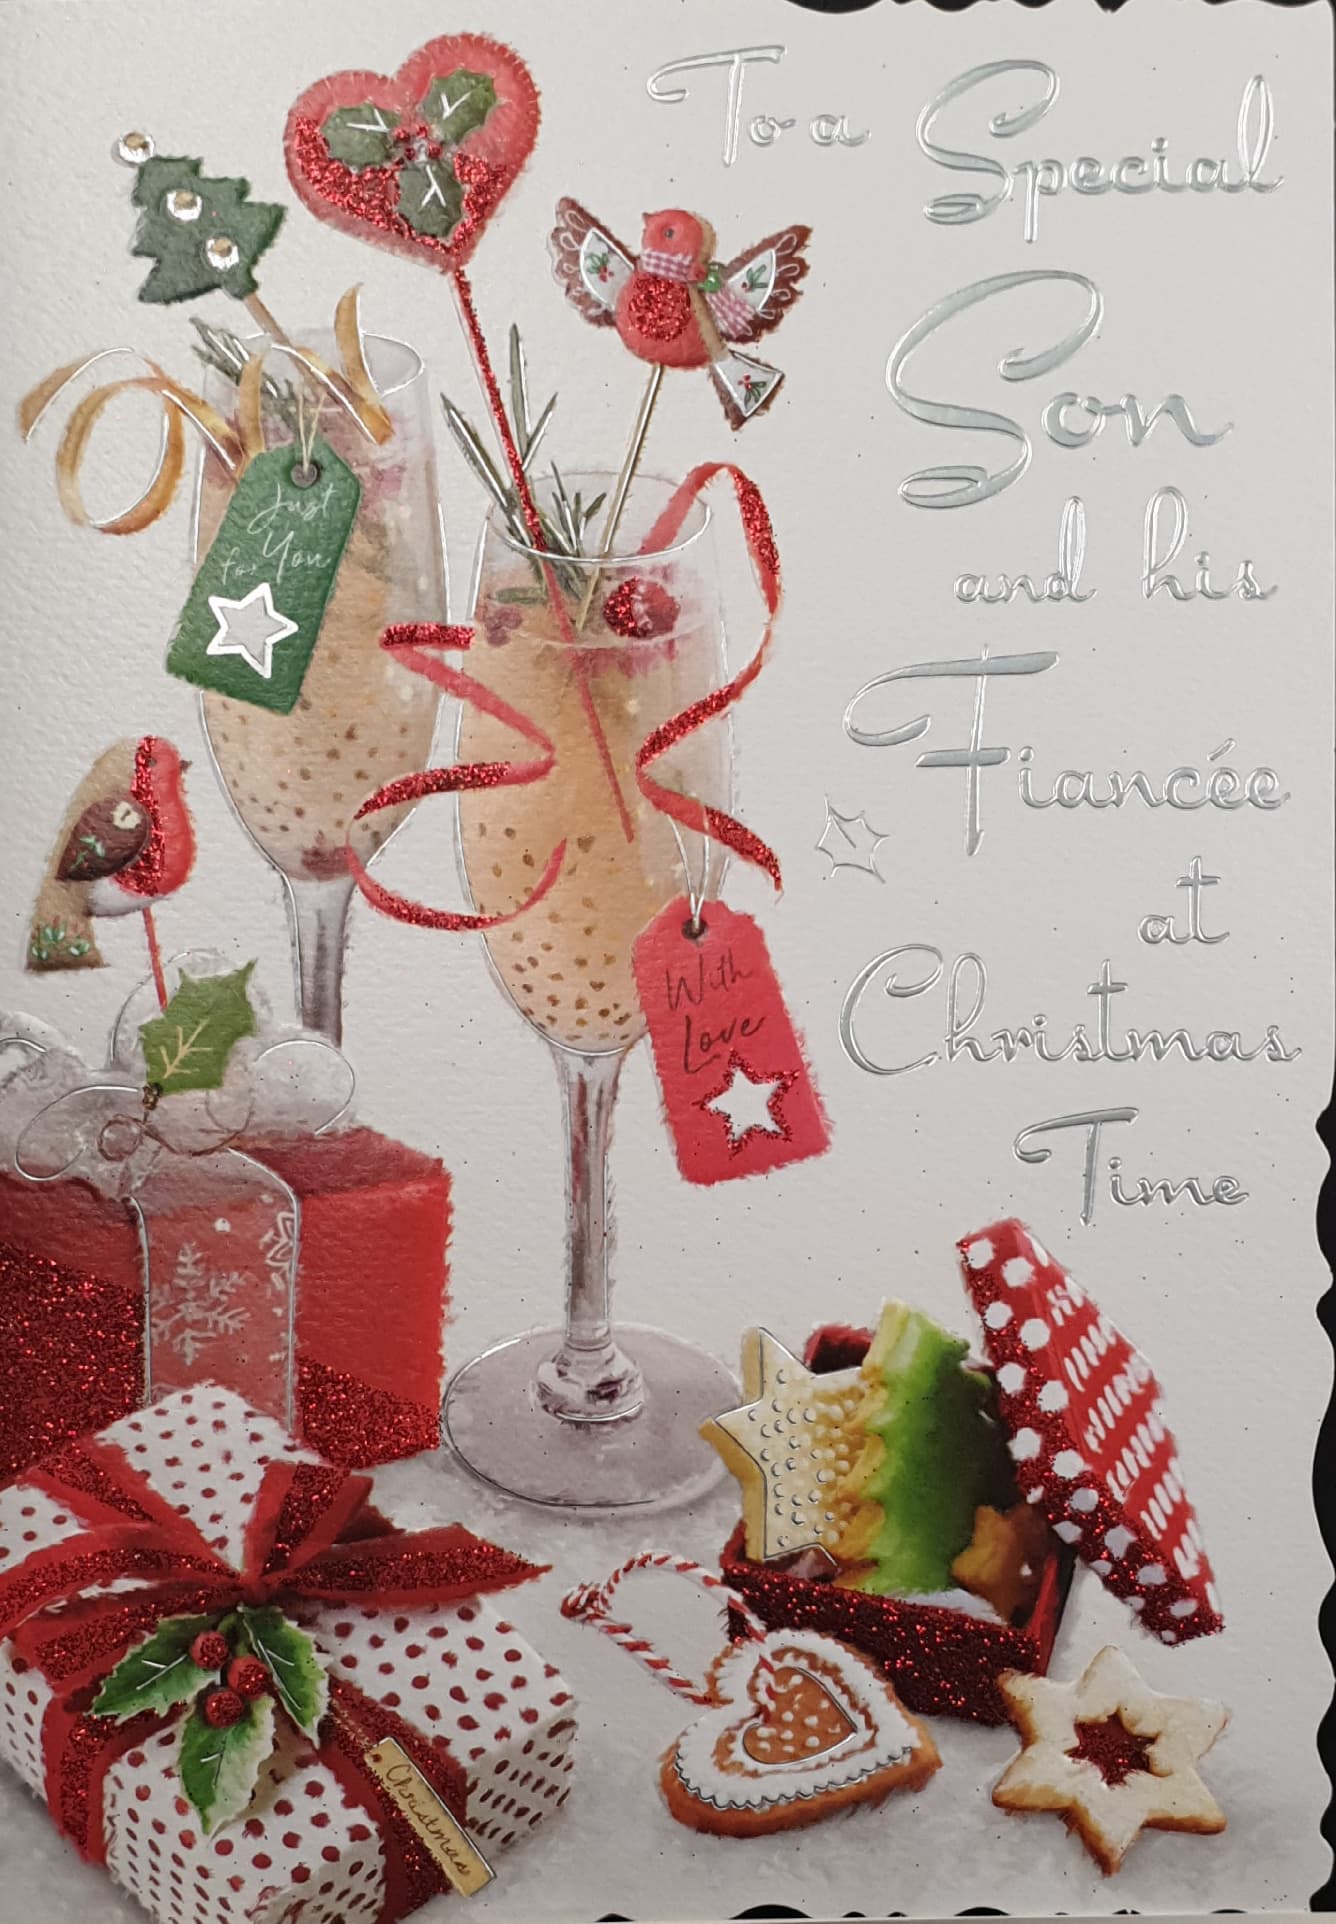 Son and his Fiancee Christmas Card - Champagne , Gifts & Ribbons